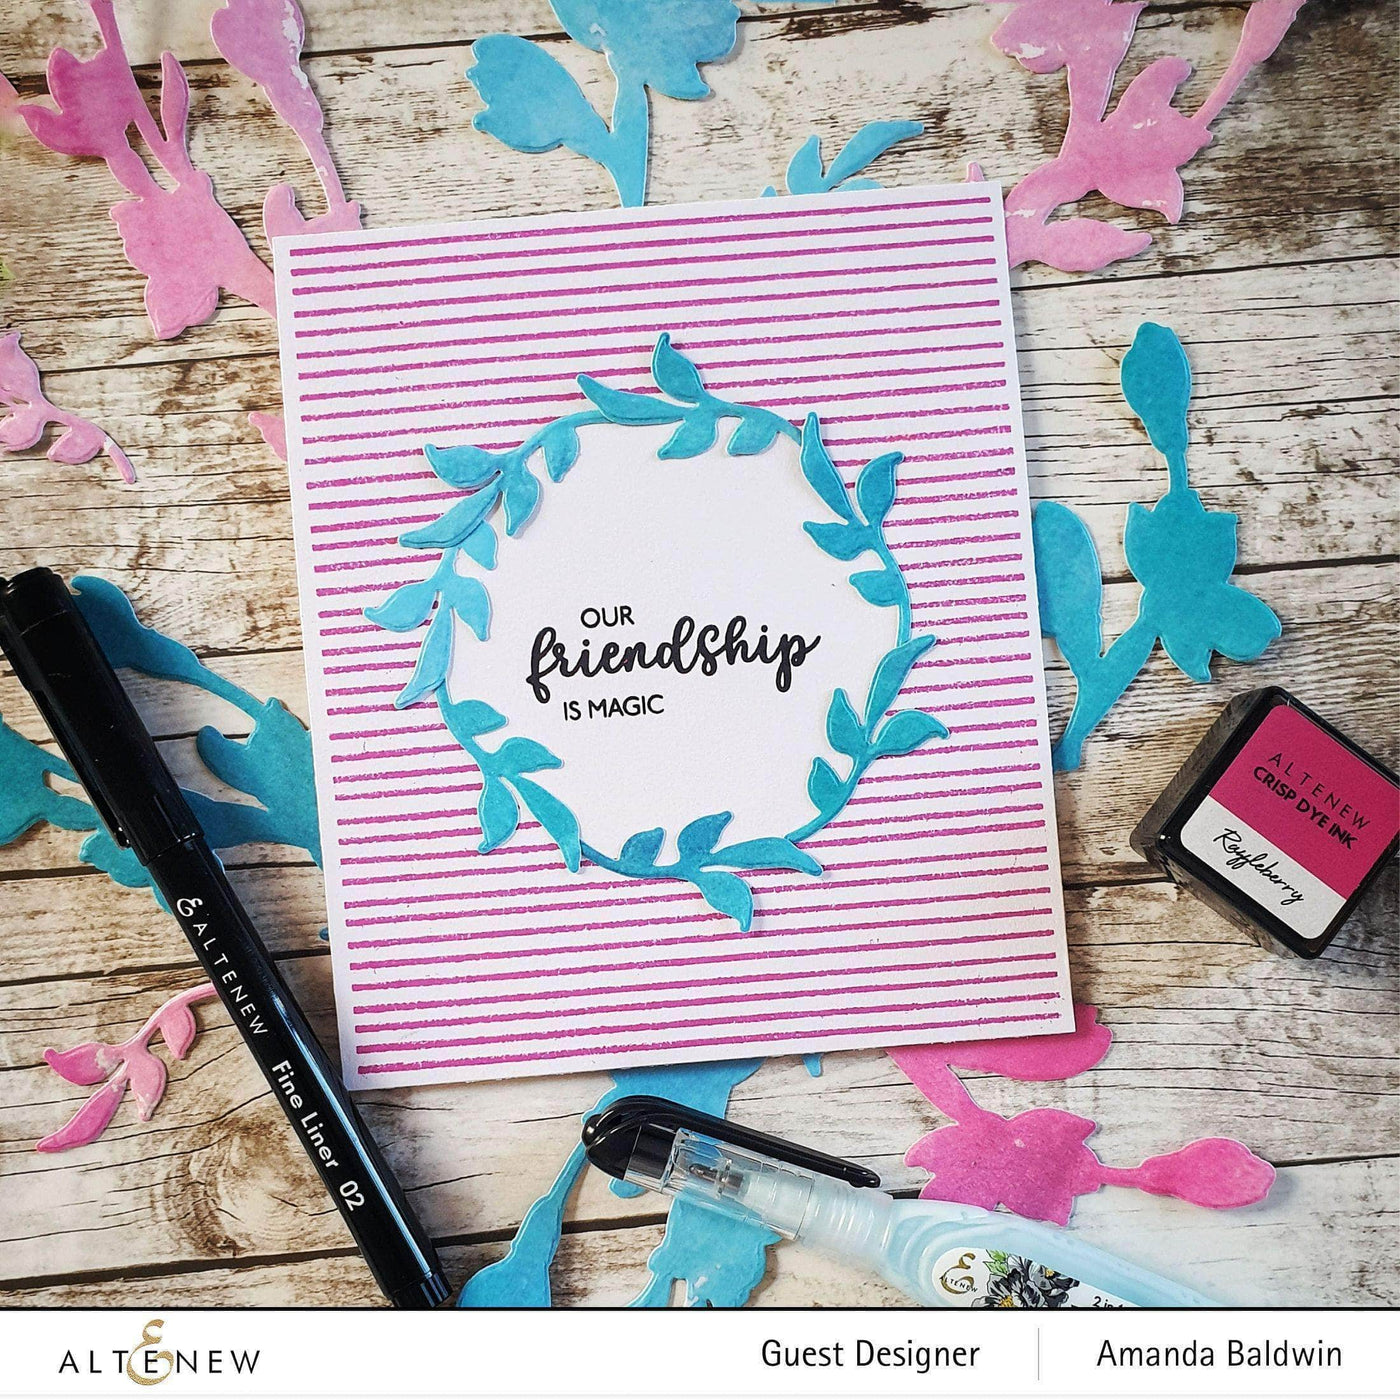 Photocentric Clear Stamps Striped Circle Stamp Set